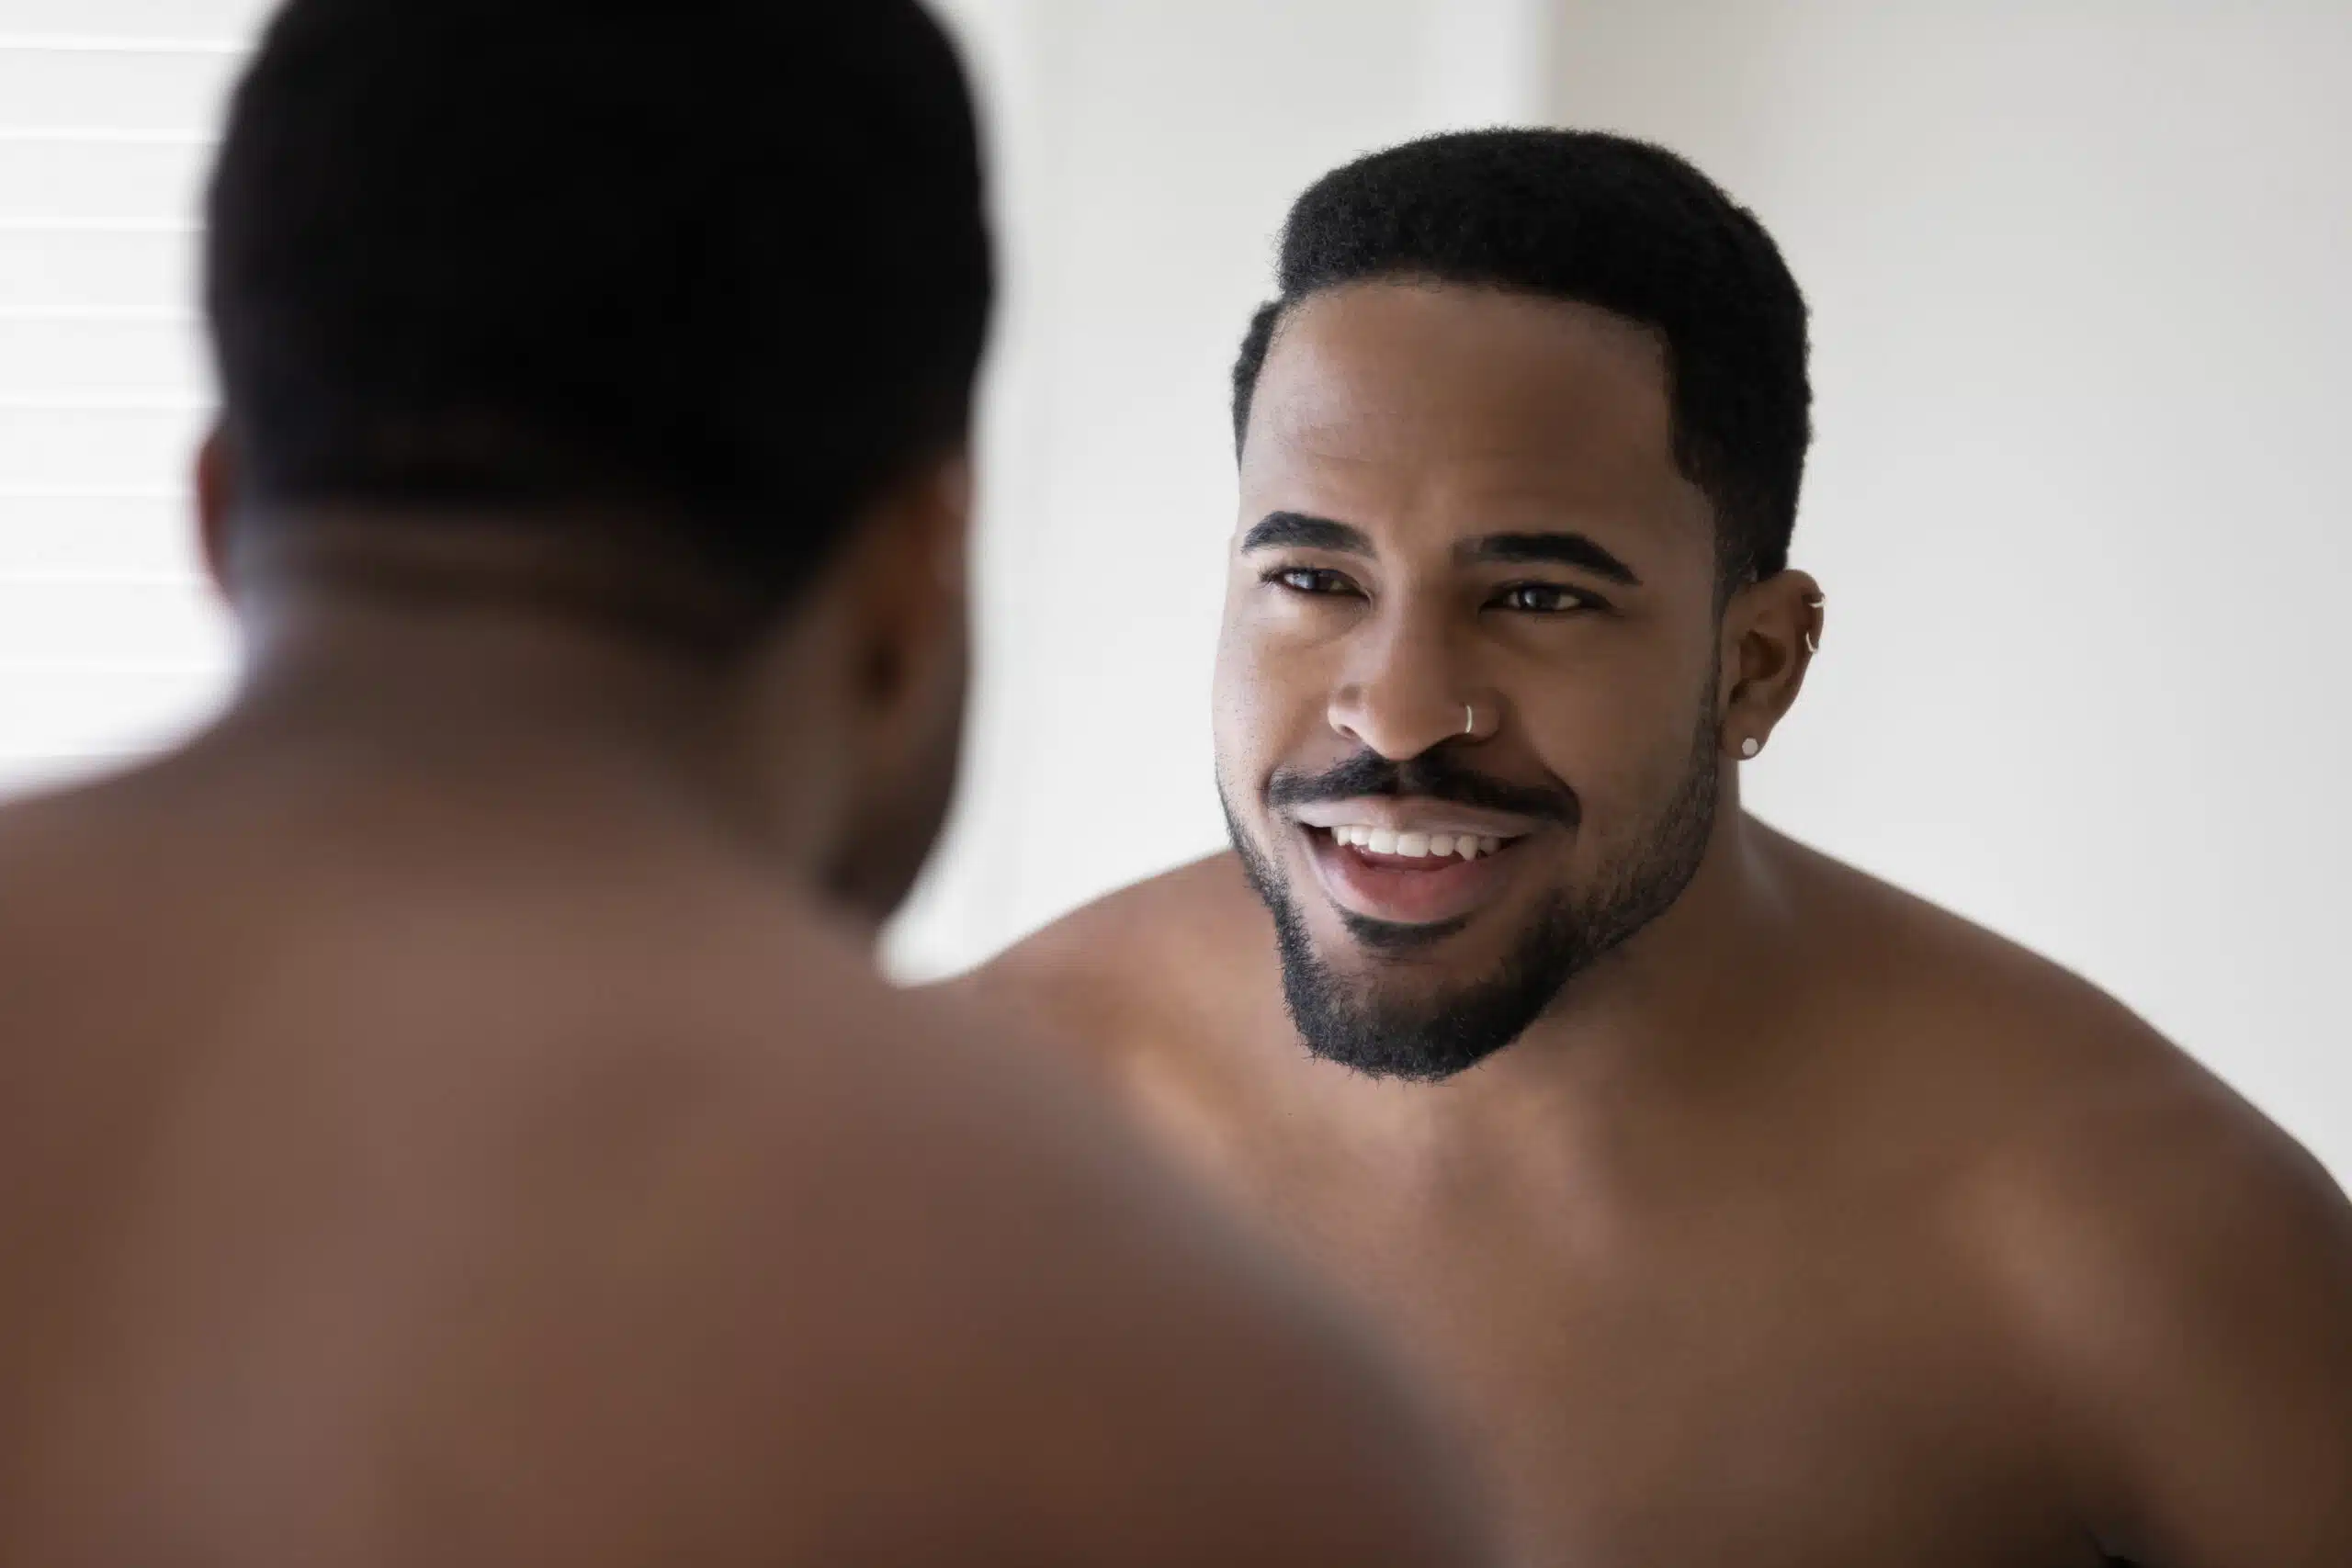 Man Looking At Himself In The Mirror